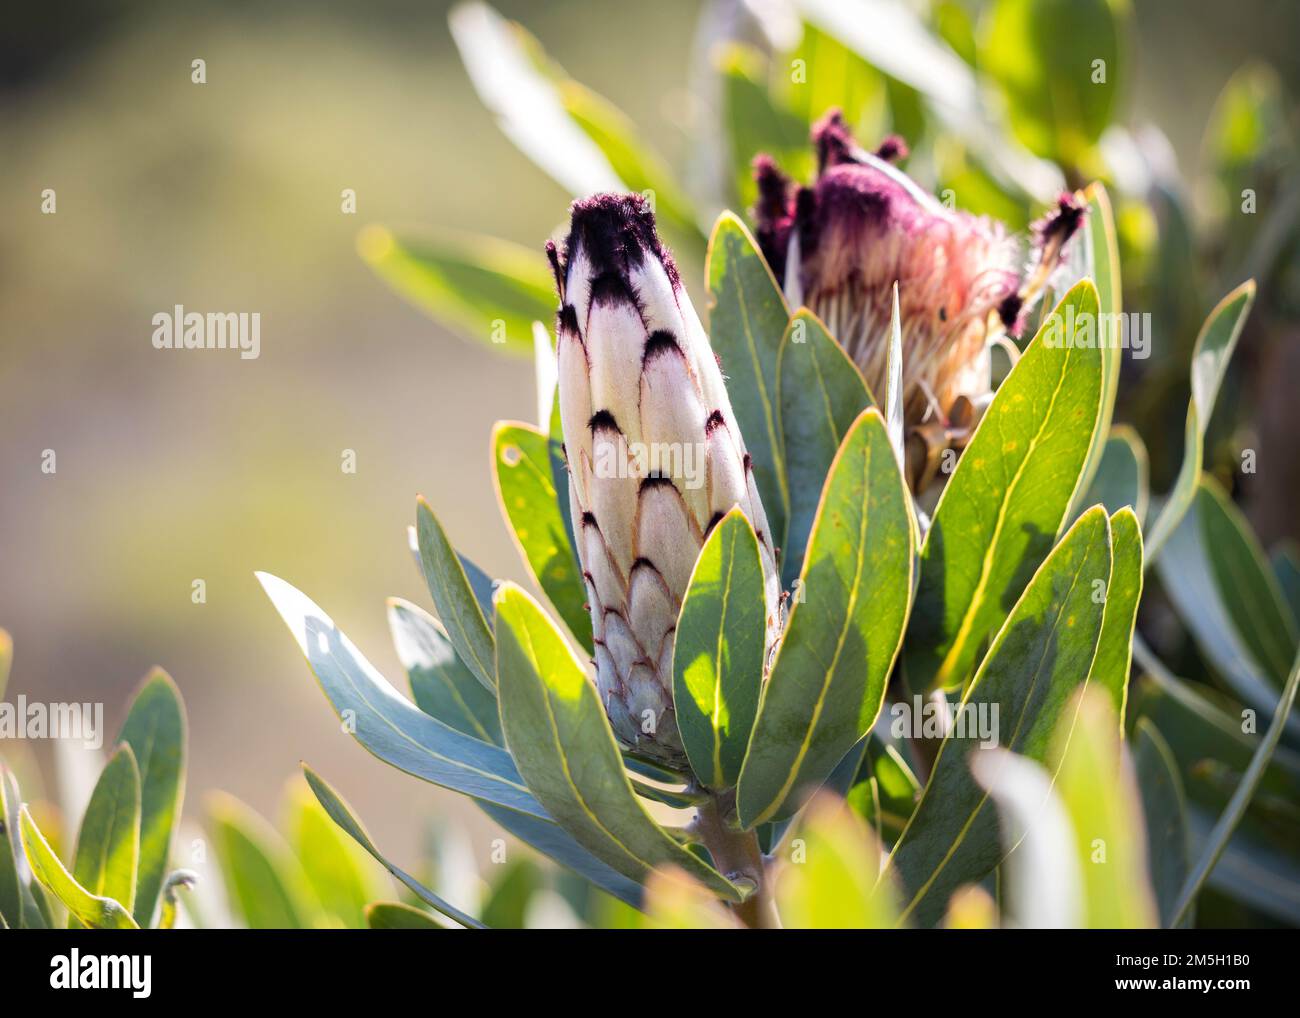 Protea or sugarbush flowering plant with a close-up of the flower buds blooming in the sunlight Stock Photo